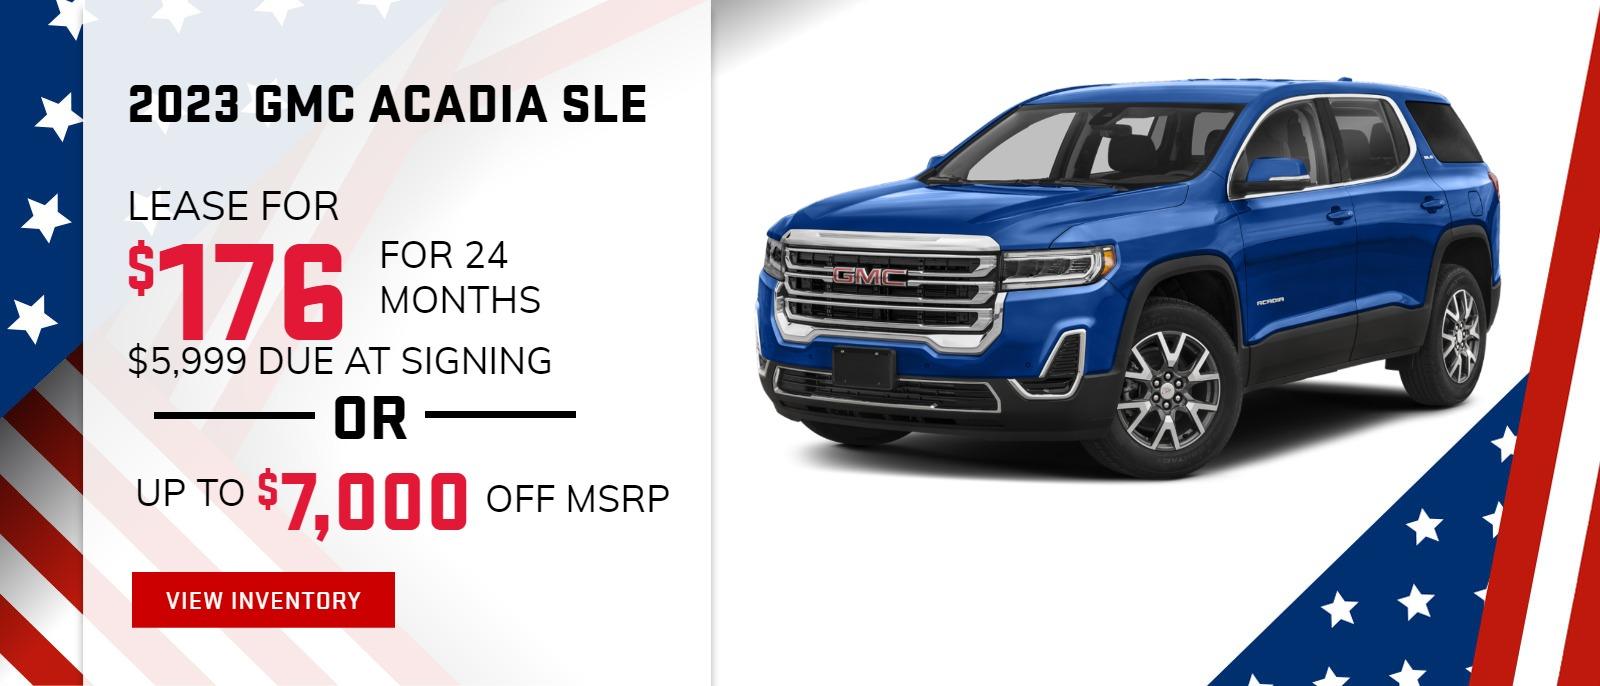 2023 GMC Acadia SLE
$176 Month Lease / 24 MONTHS / $5999 Due at Signing
$7,000 OFF MSRP